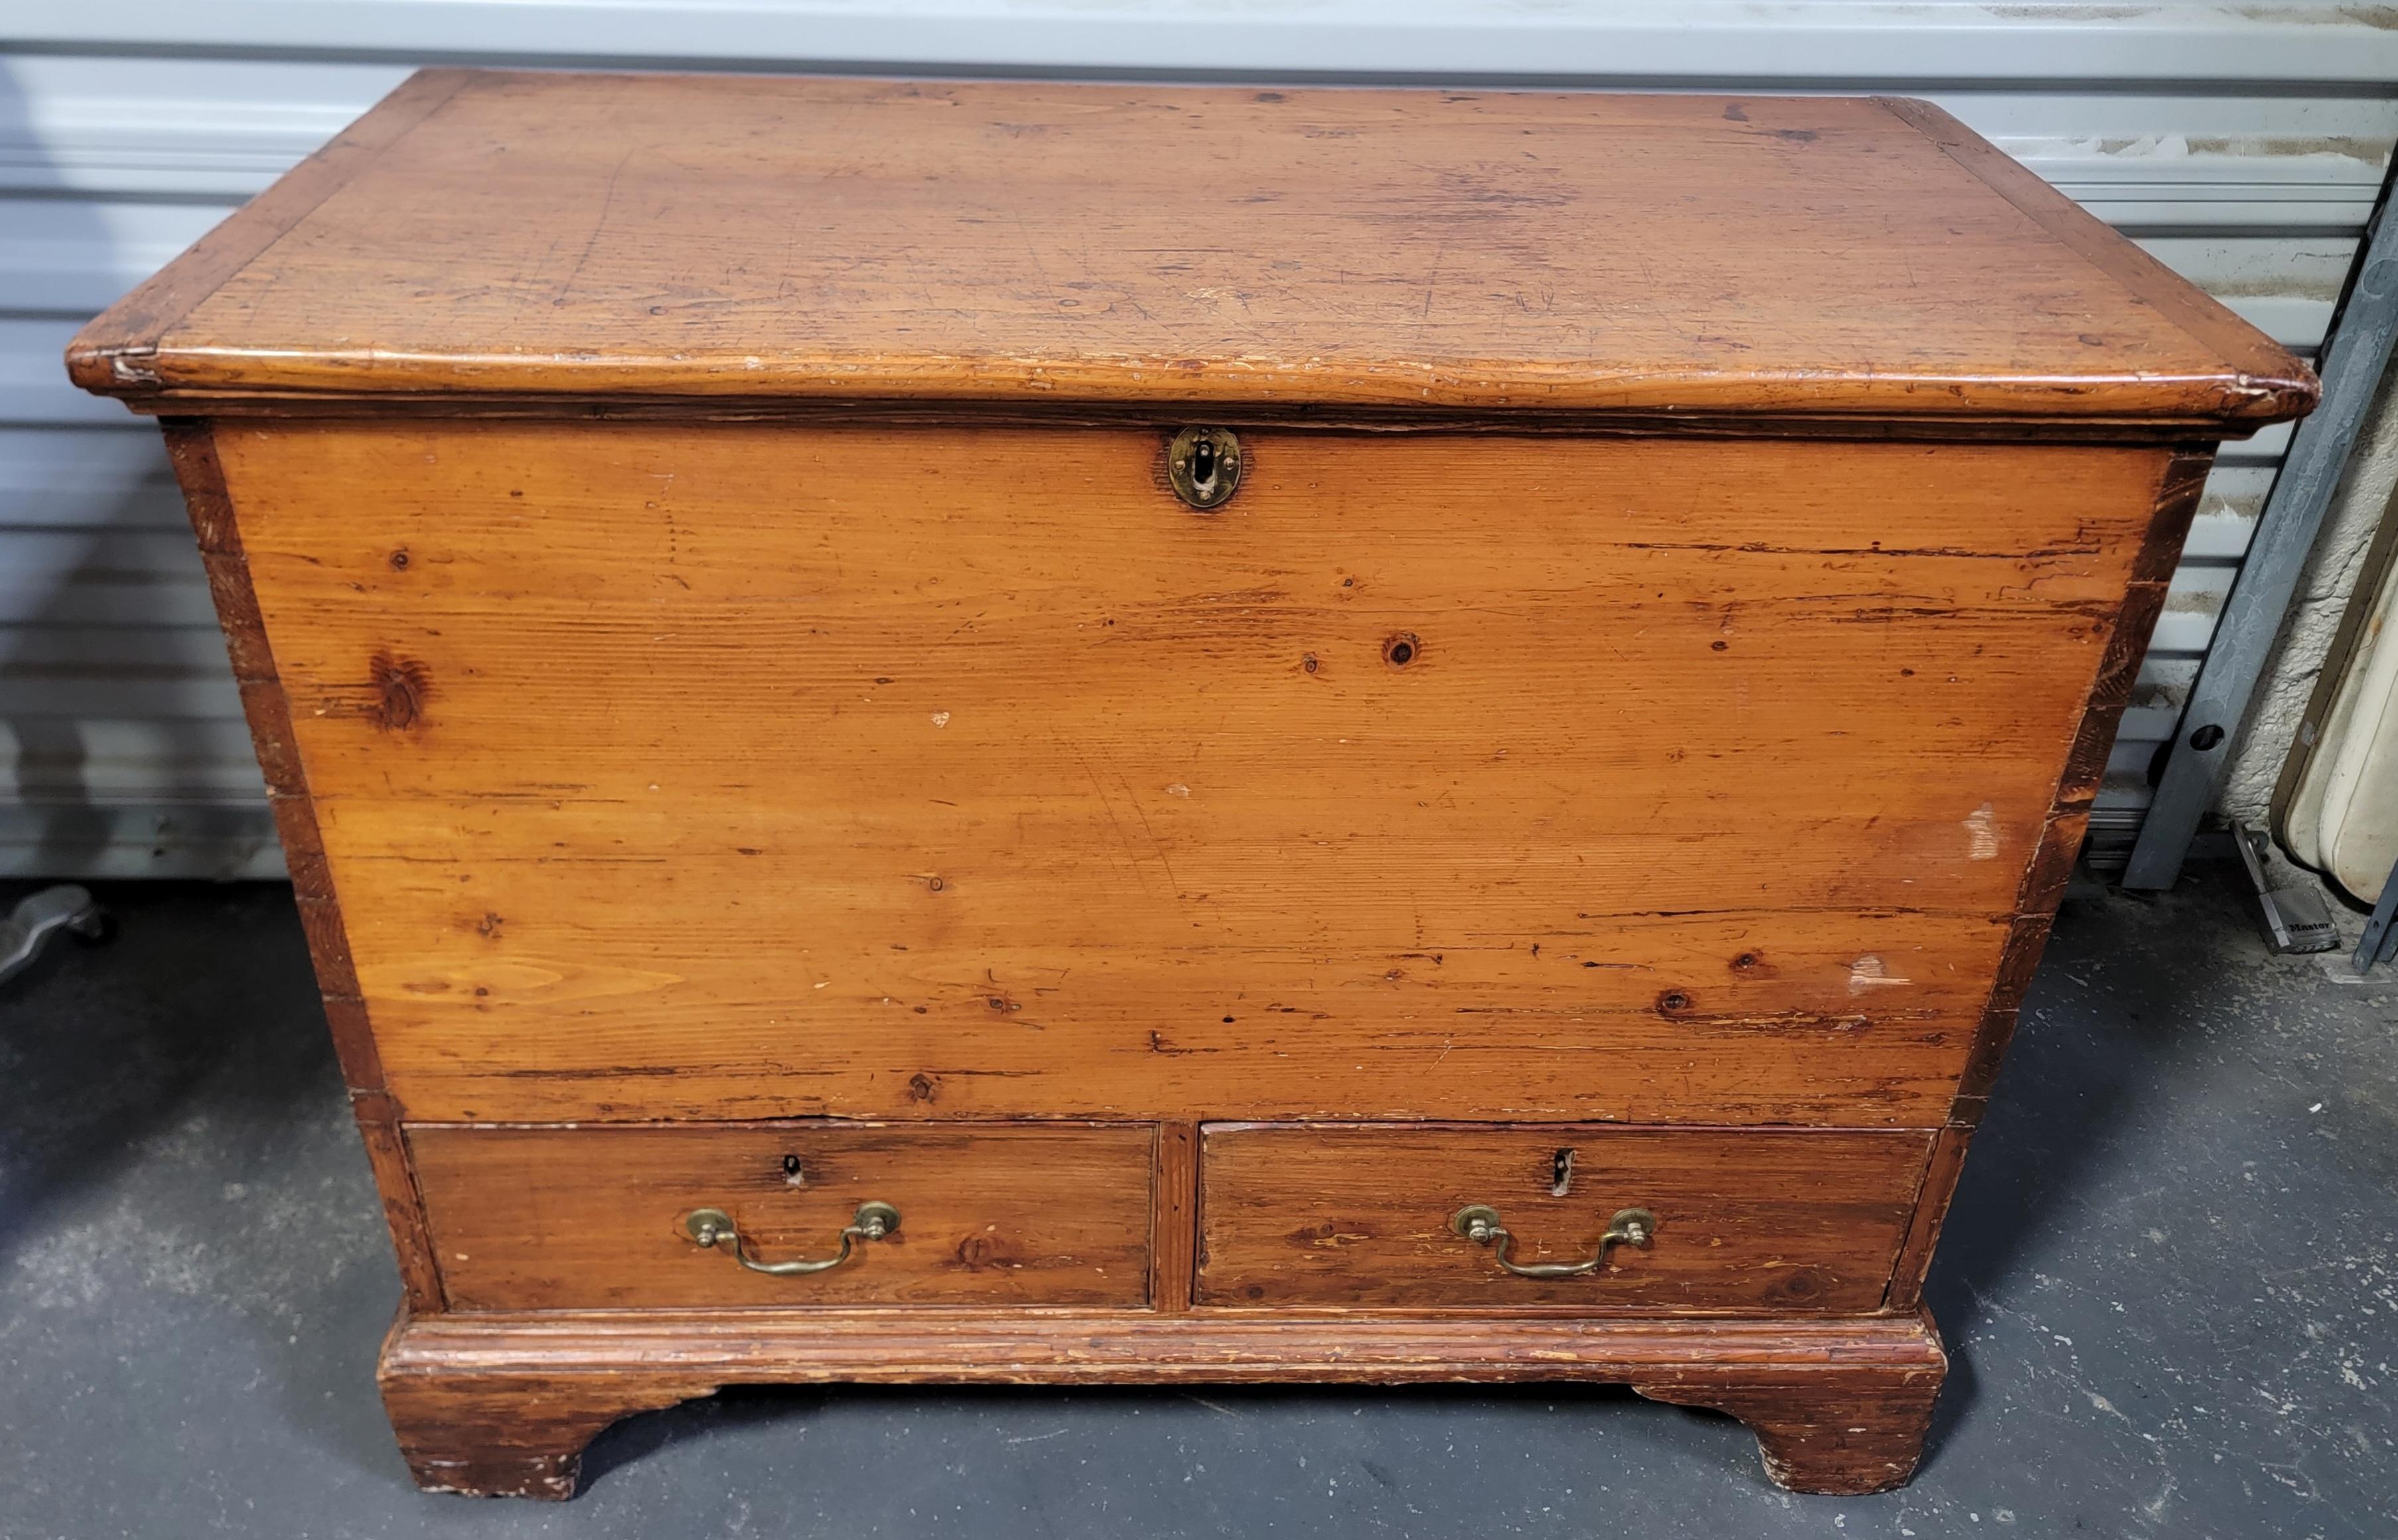 Old world primitive charm to this Early American pine blanket chest. Original hand wrought iron hinges, original lock. Hand made with hand scribed dovetail joinery along all four corners. Beautiful, warm patina to finish. 